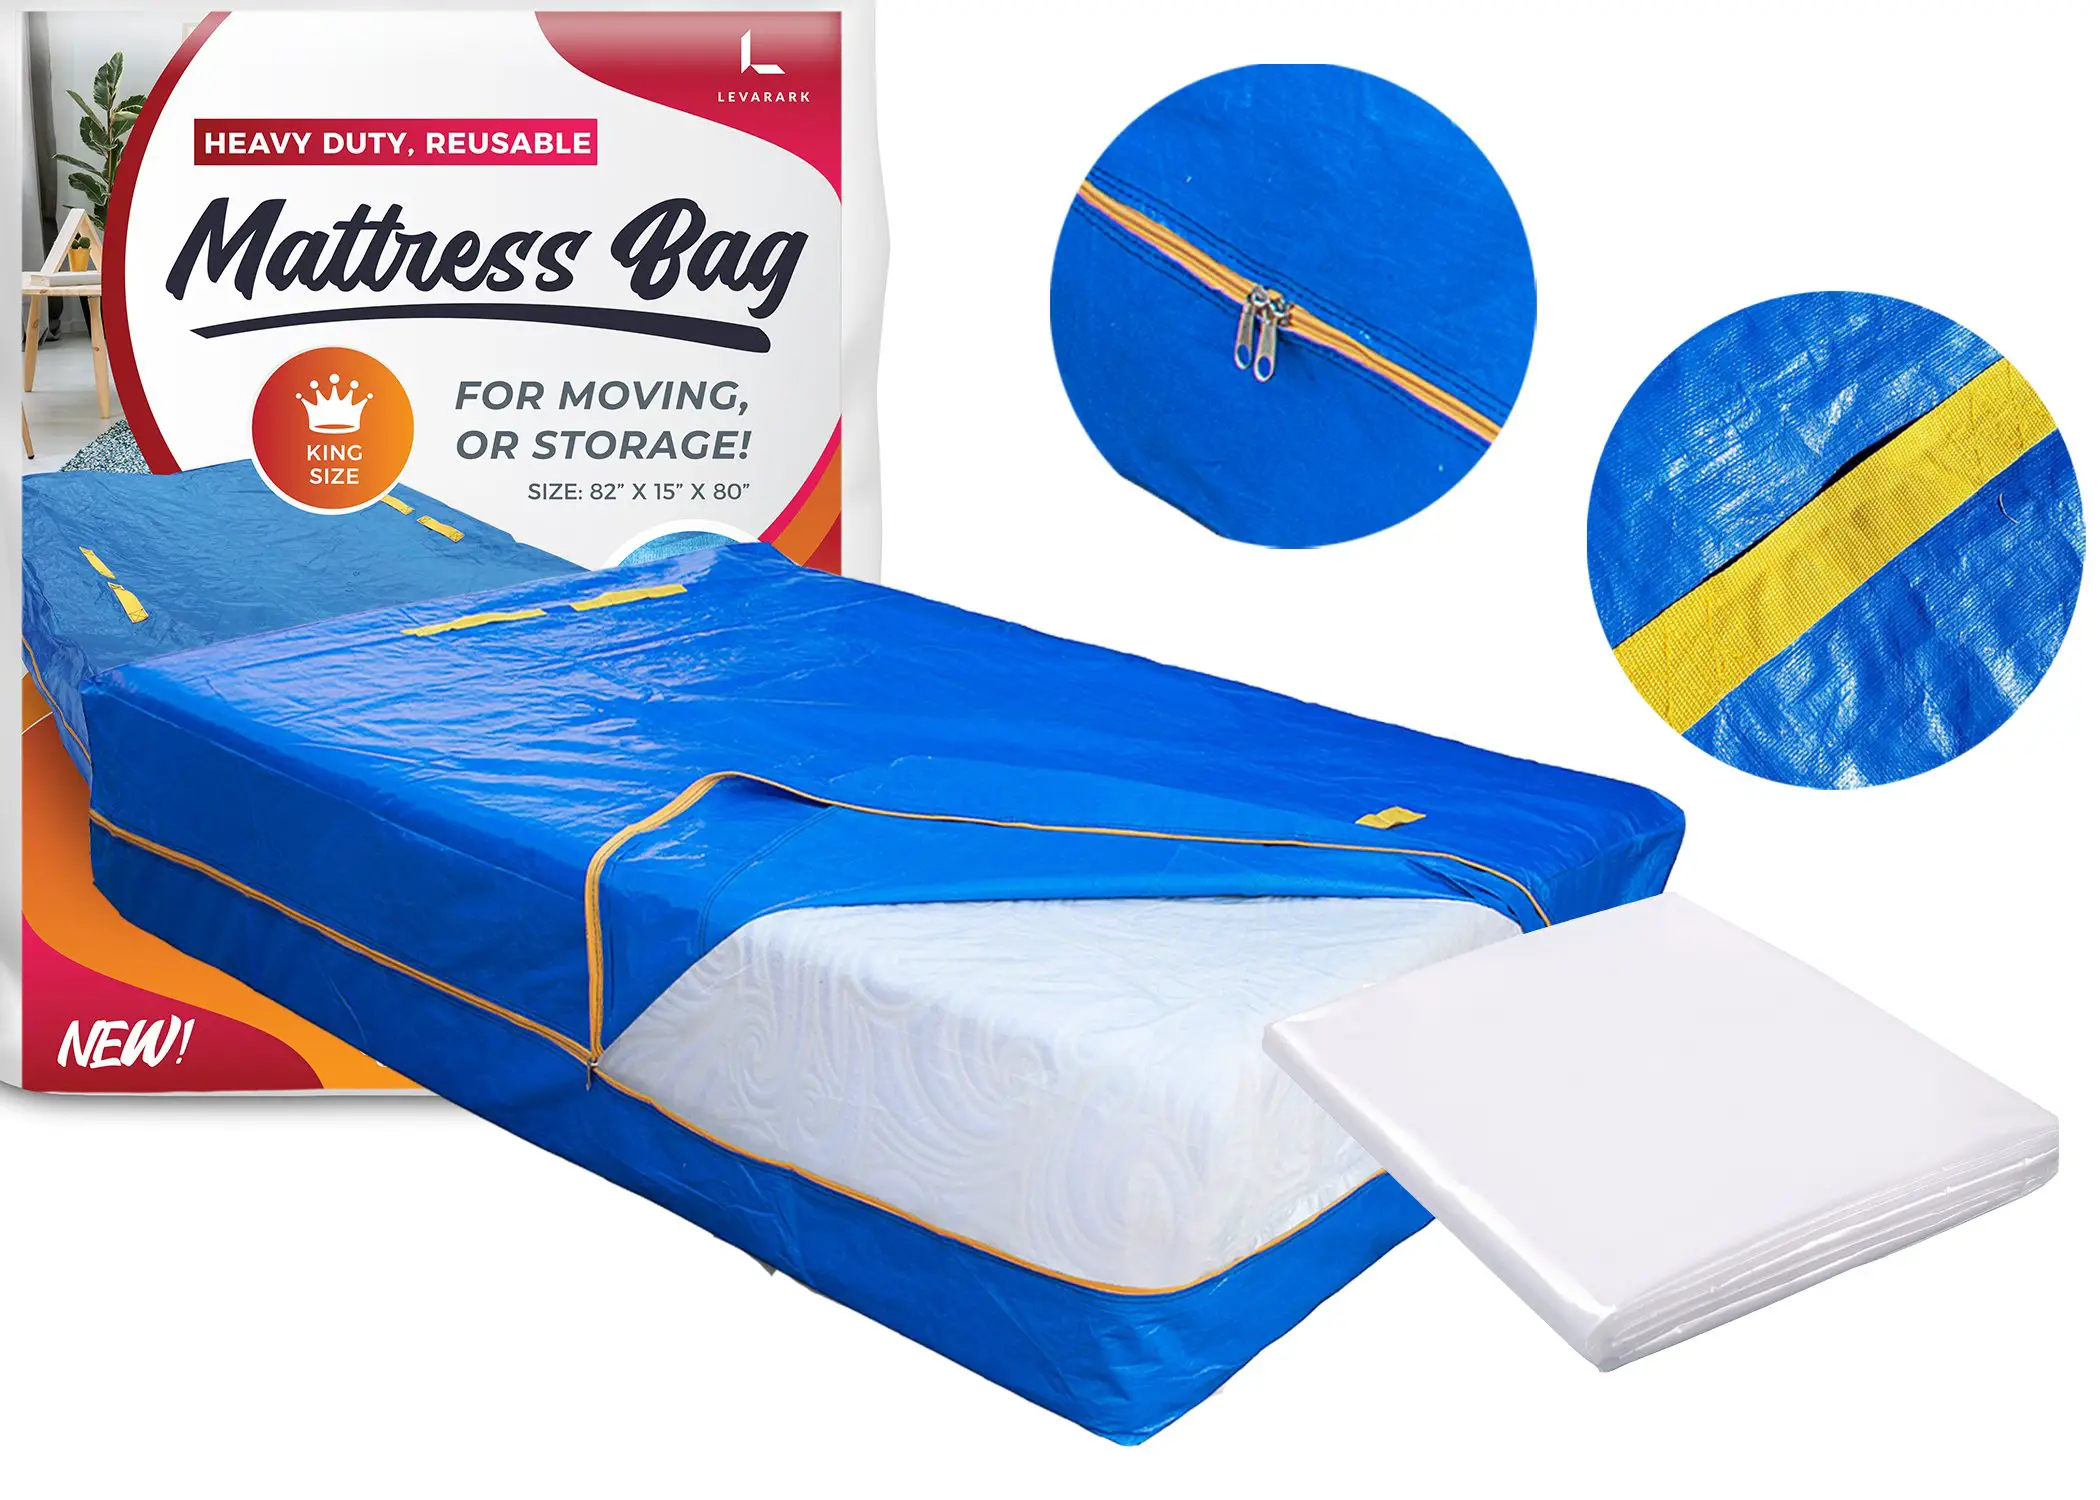 Reusable Mattress Bag for moving and storage  Levarark